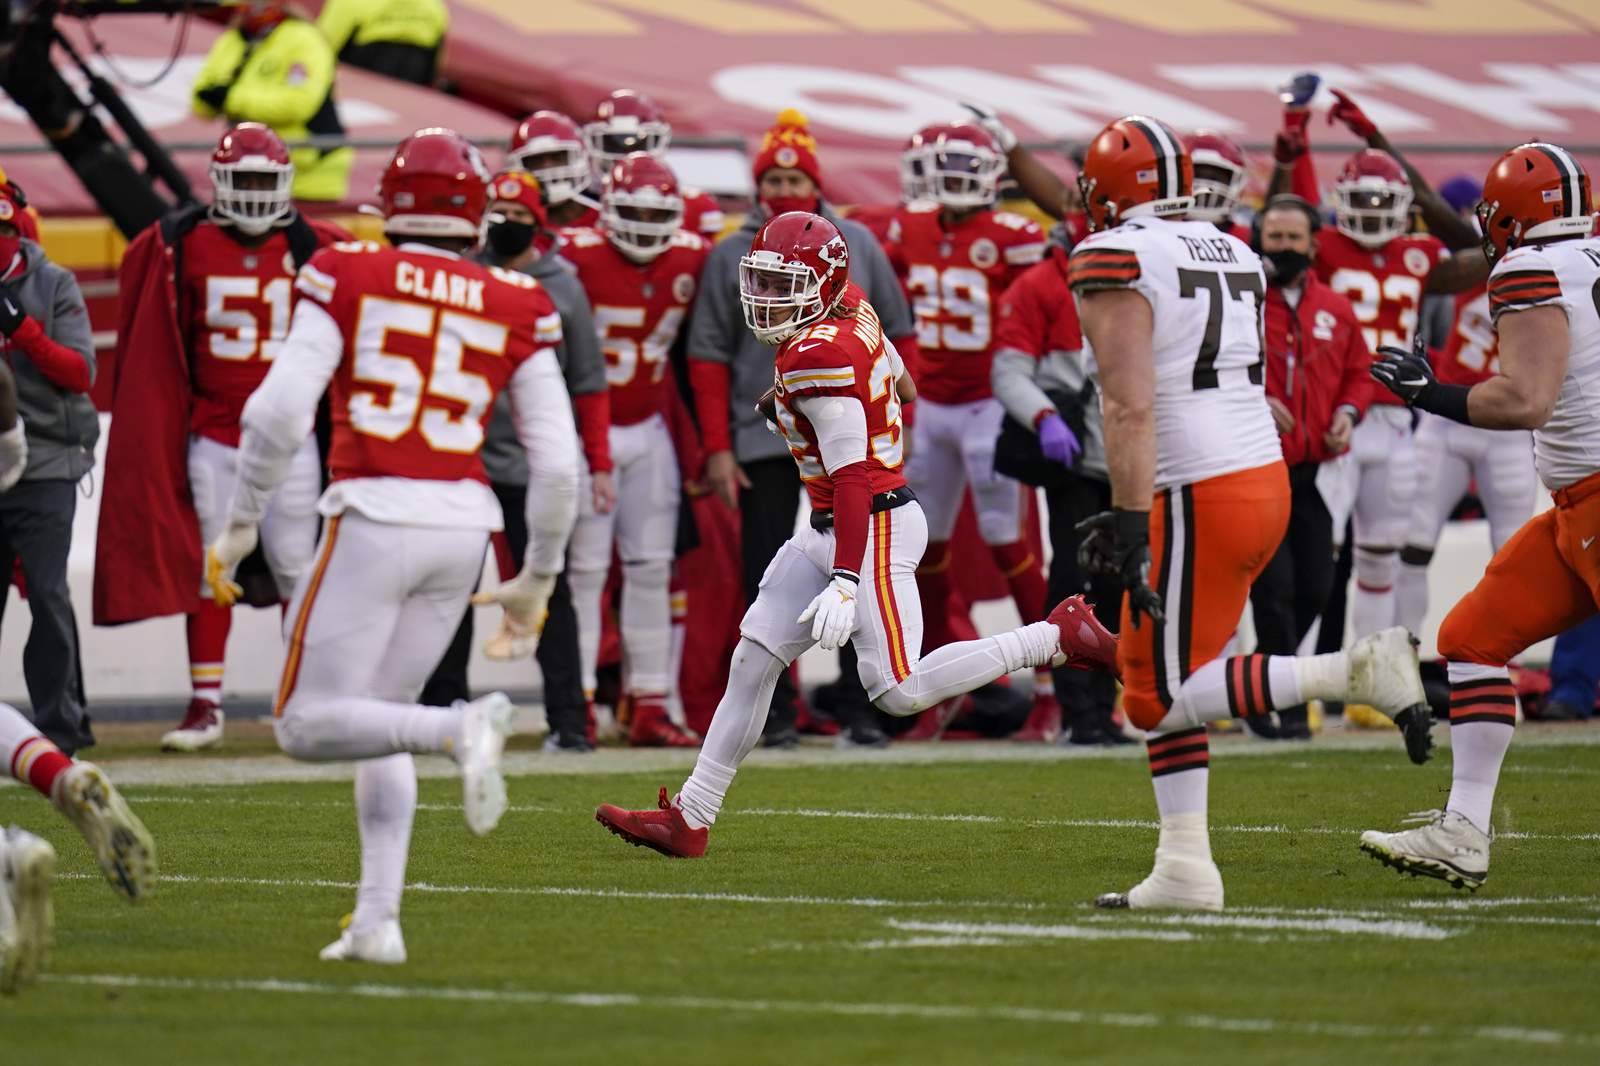 Chiefs' Mathieu making most of opportunity in Kansas City